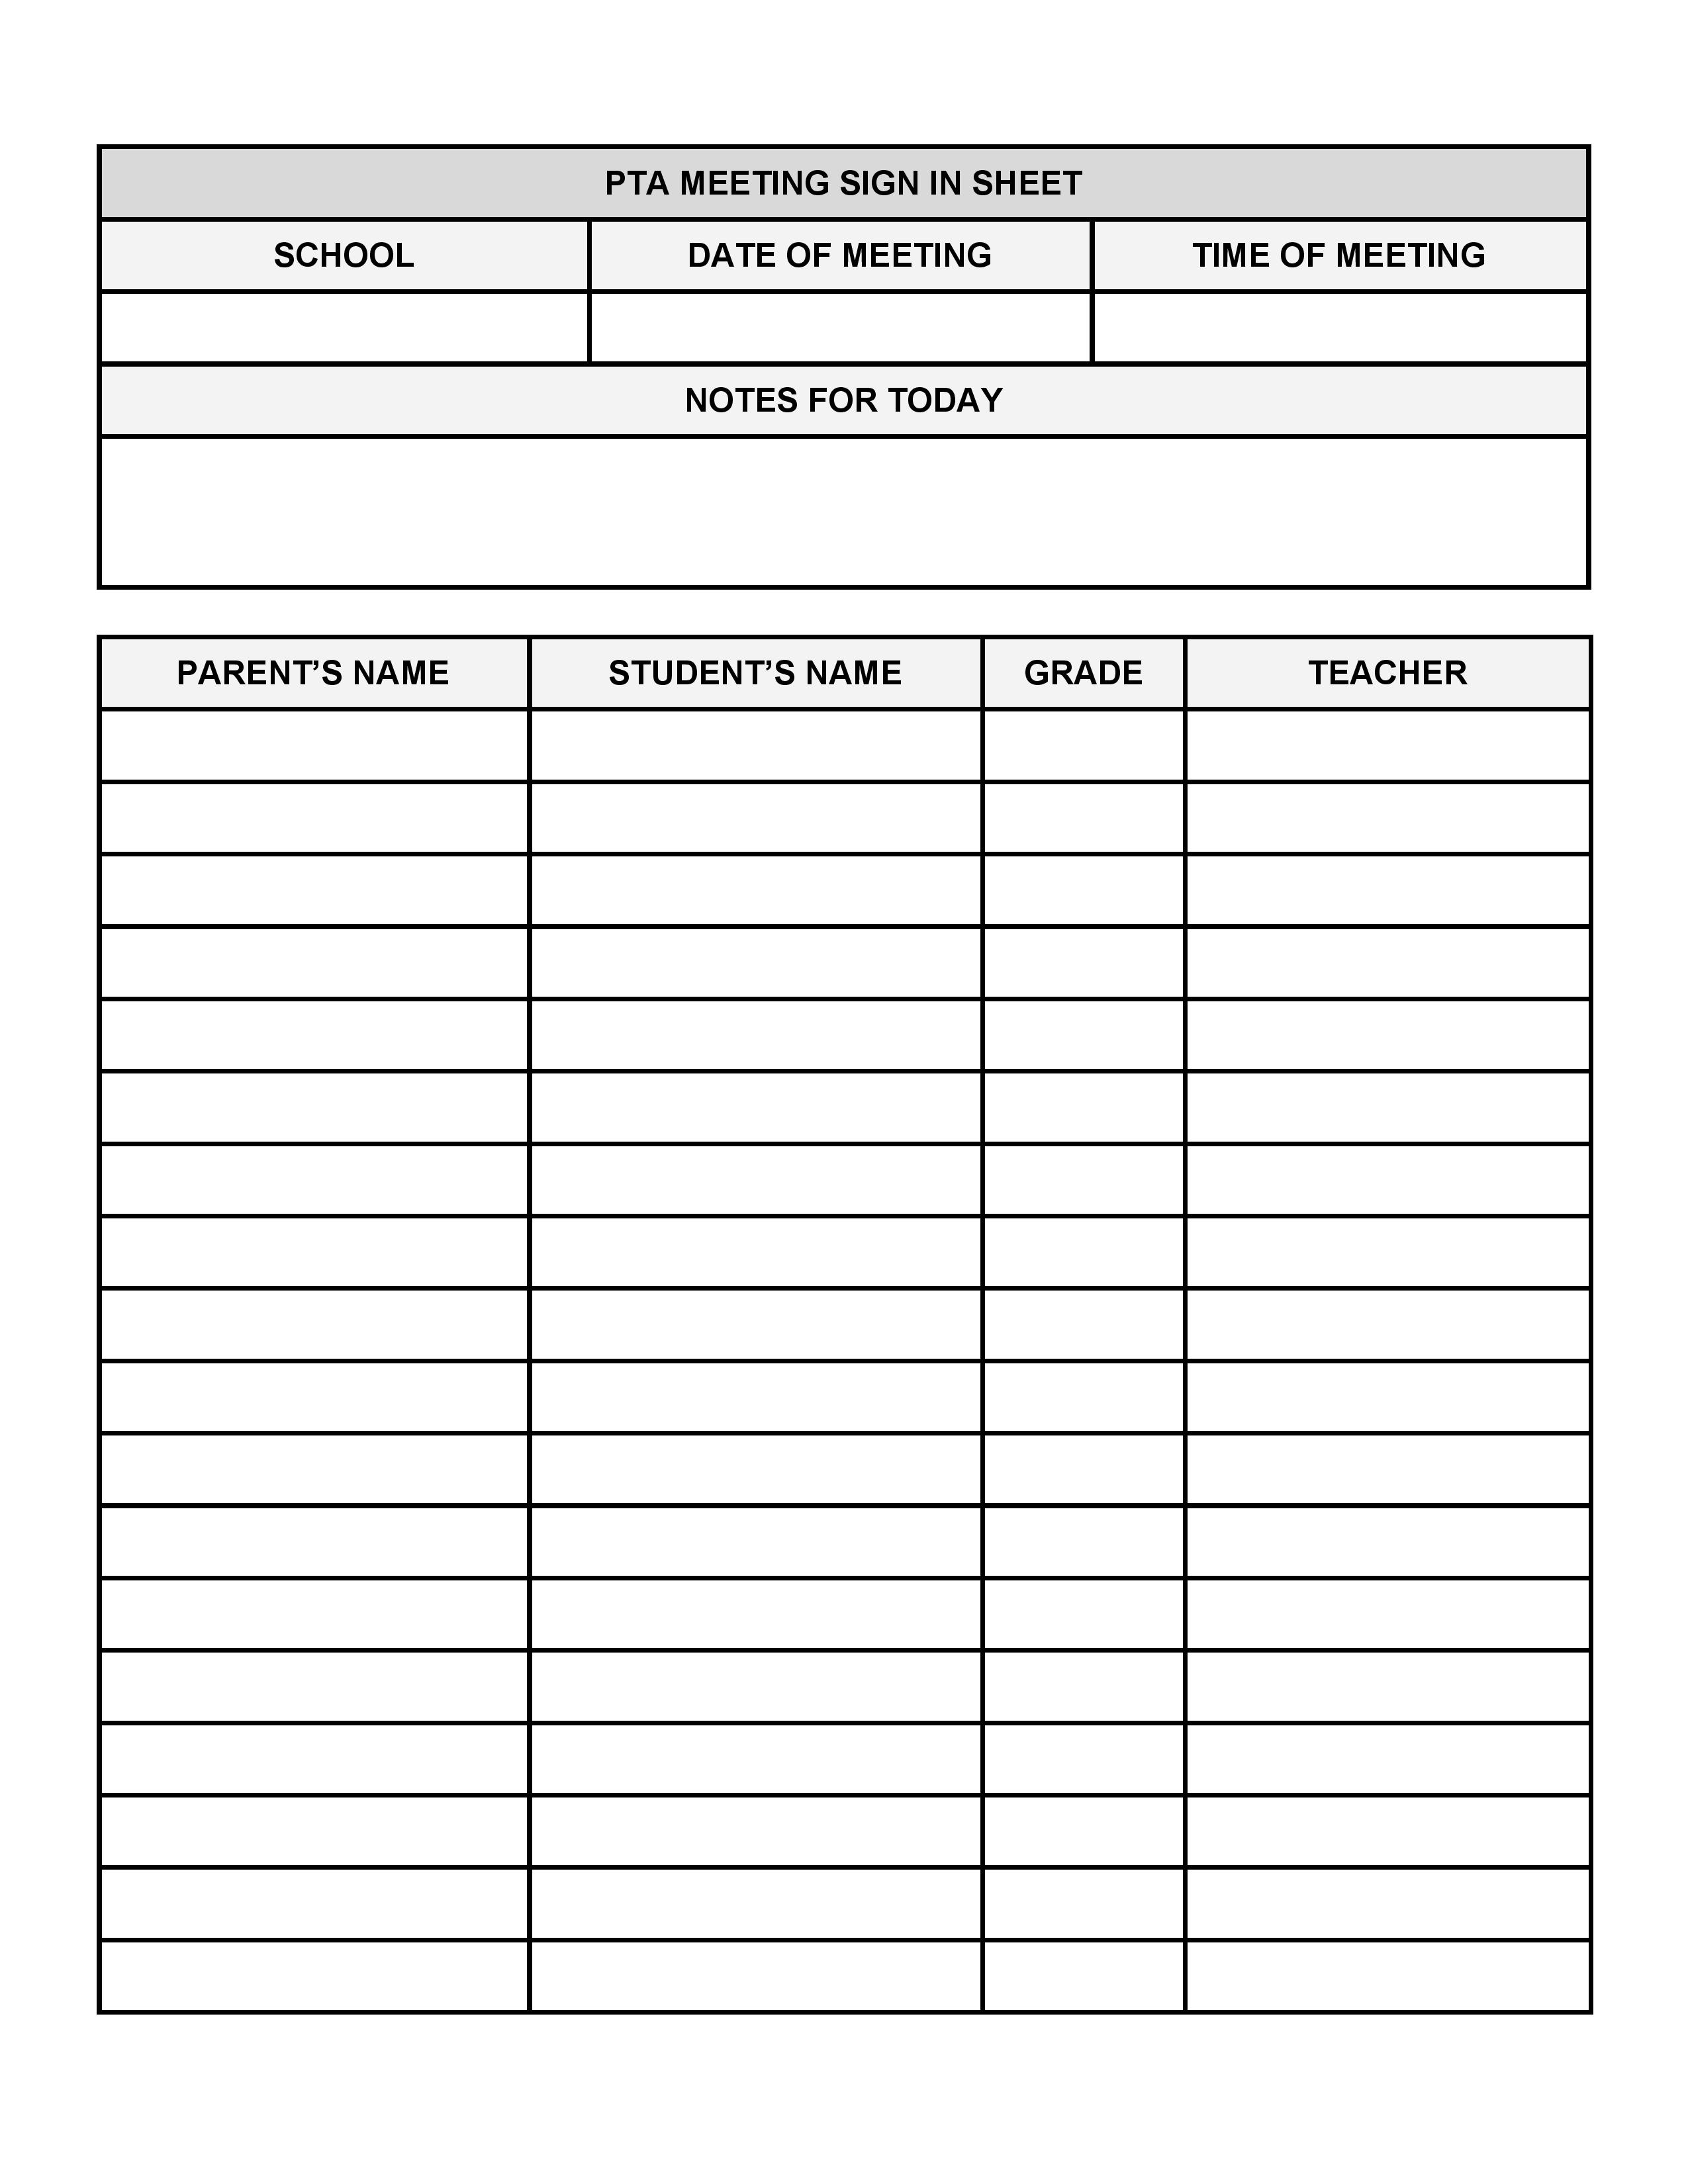 PTA Meeting Sign In Sheet  Template For Meeting Sign In Sheet Template